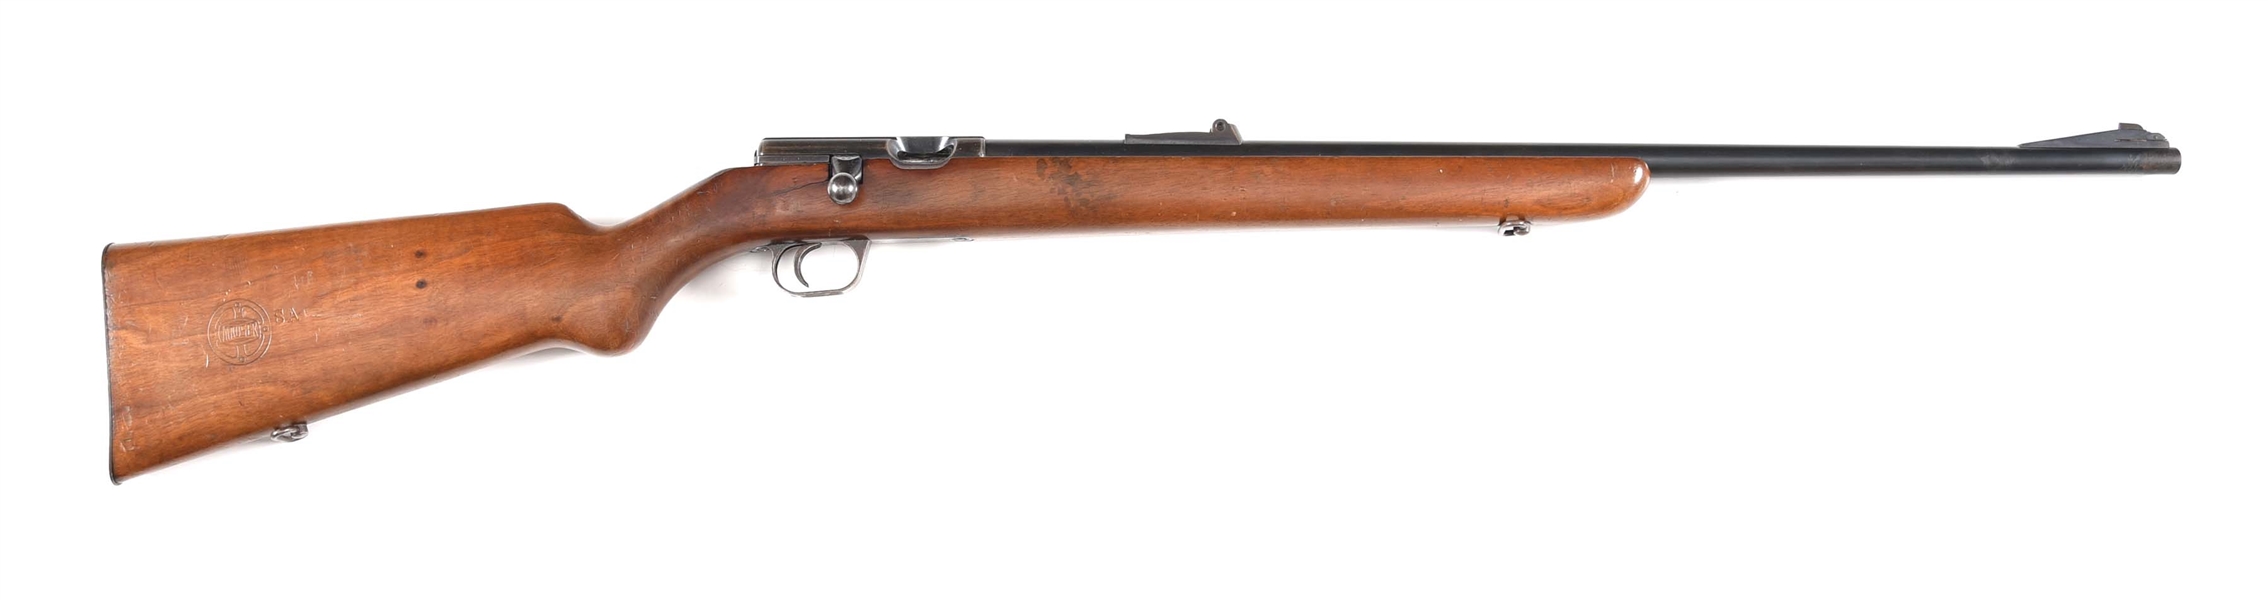 (C) MAUSER ES-340N BOLT ACTION SPORTING RIFLE